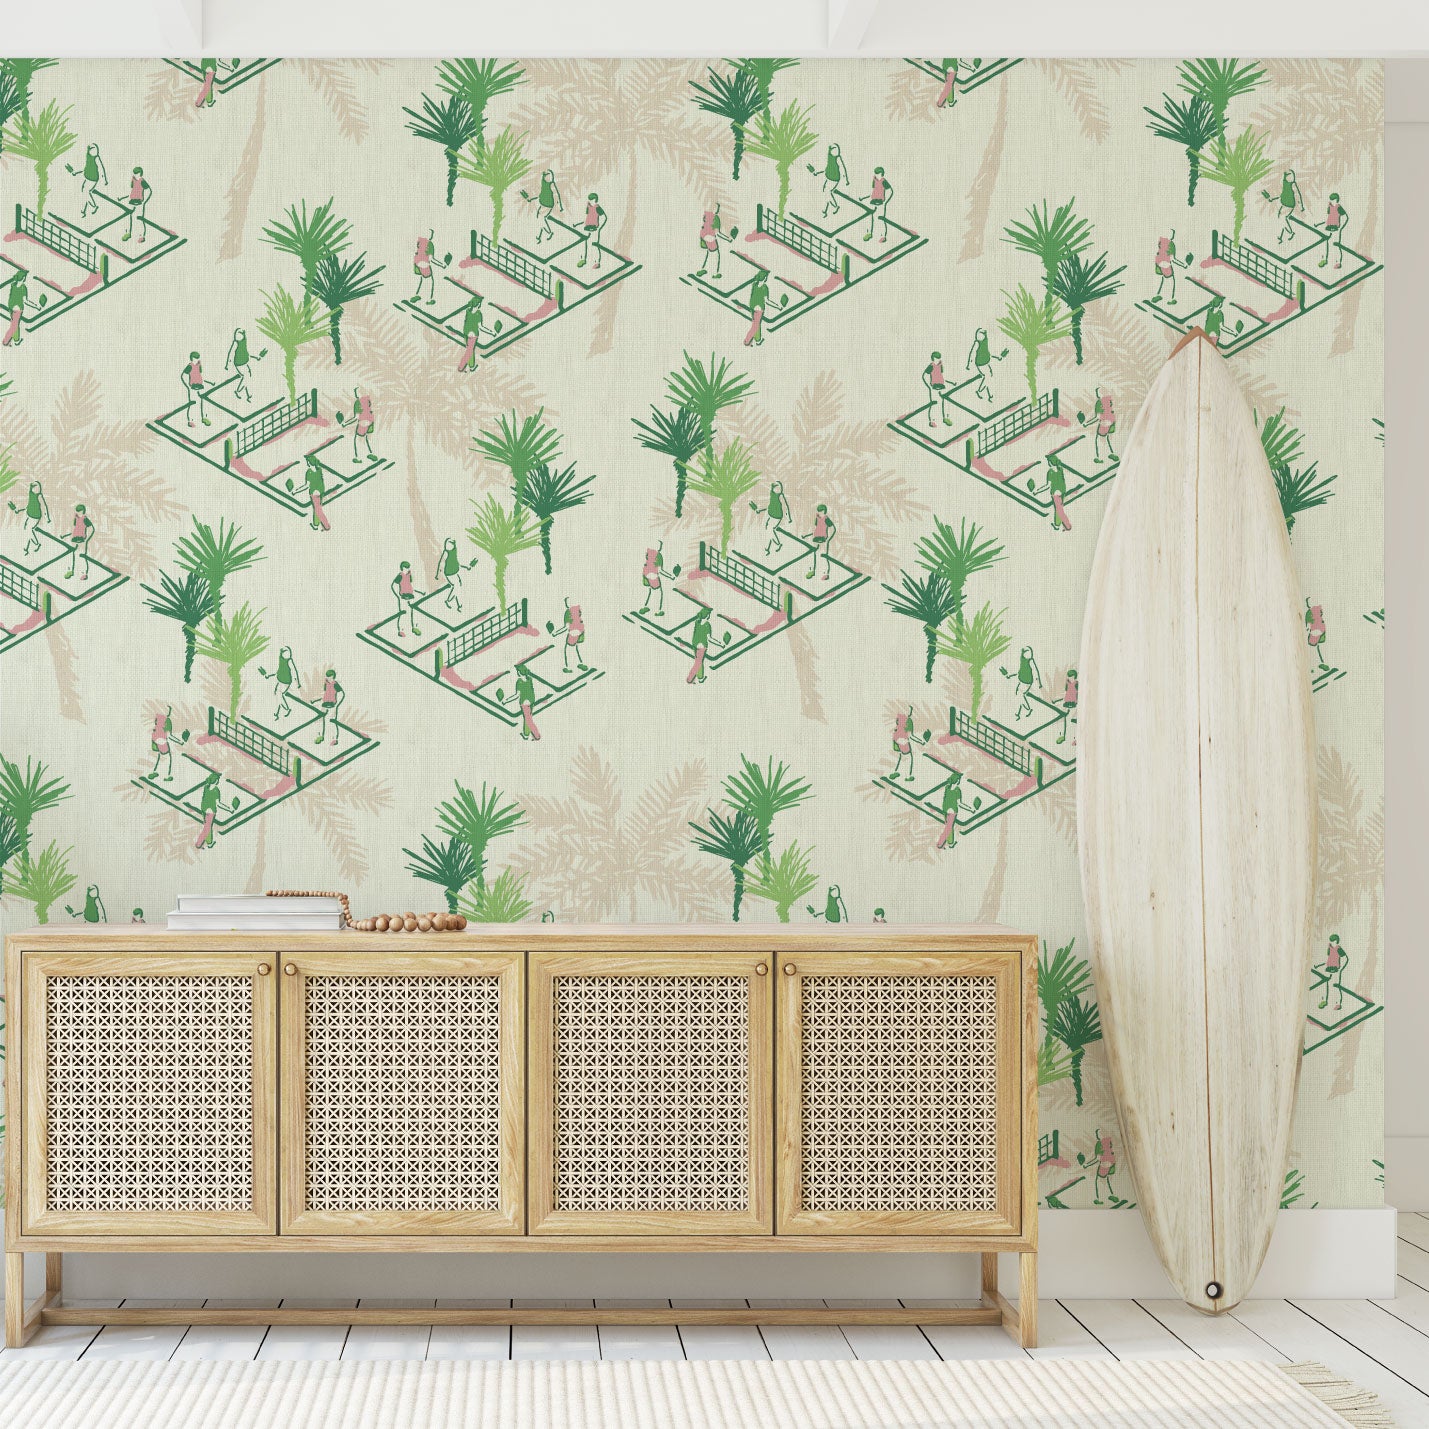 wallpaper Natural Textured Eco-Friendly Non-toxic High-quality Sustainable Interior Design Bold Custom Tailor-made Retro chic Bold tropical kid playroom palm tree botanical sport garden pickleball court players paddle preppy coastal vacation toile green cream tan neutral pink paperweave paper weave